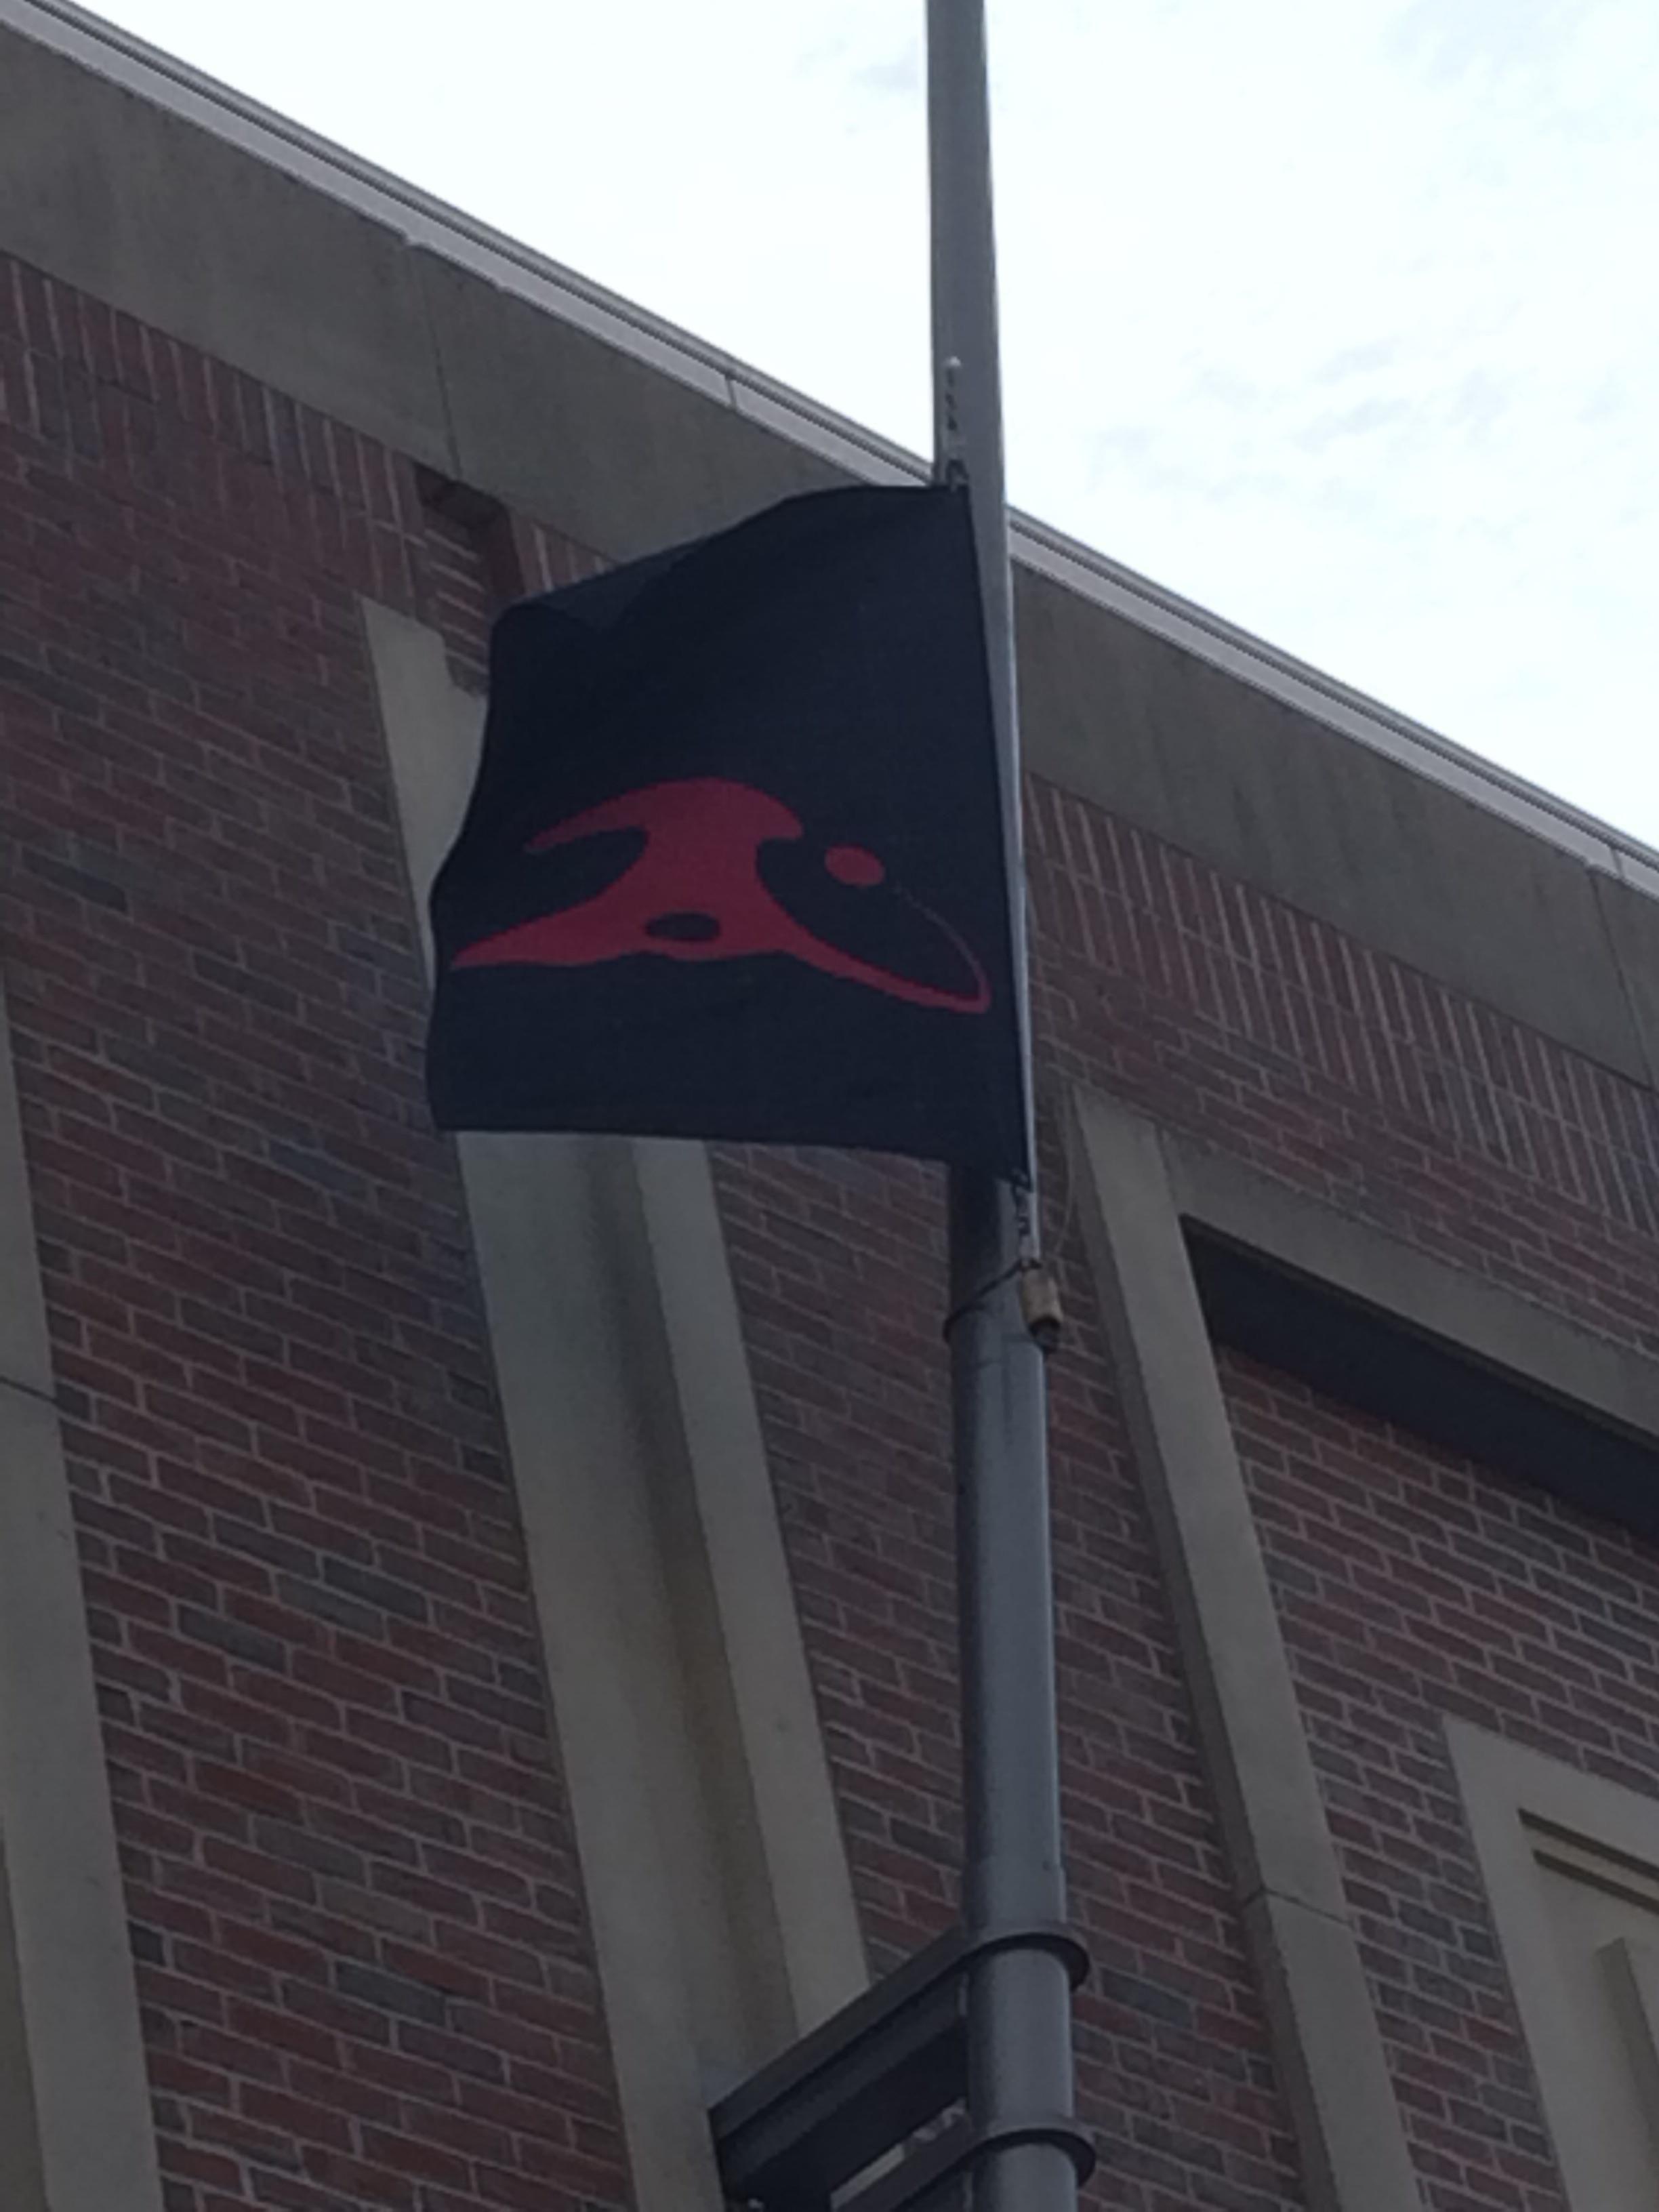 Mousesports Logo - The Mousesports logo is upside down on their flag outside the arena ...